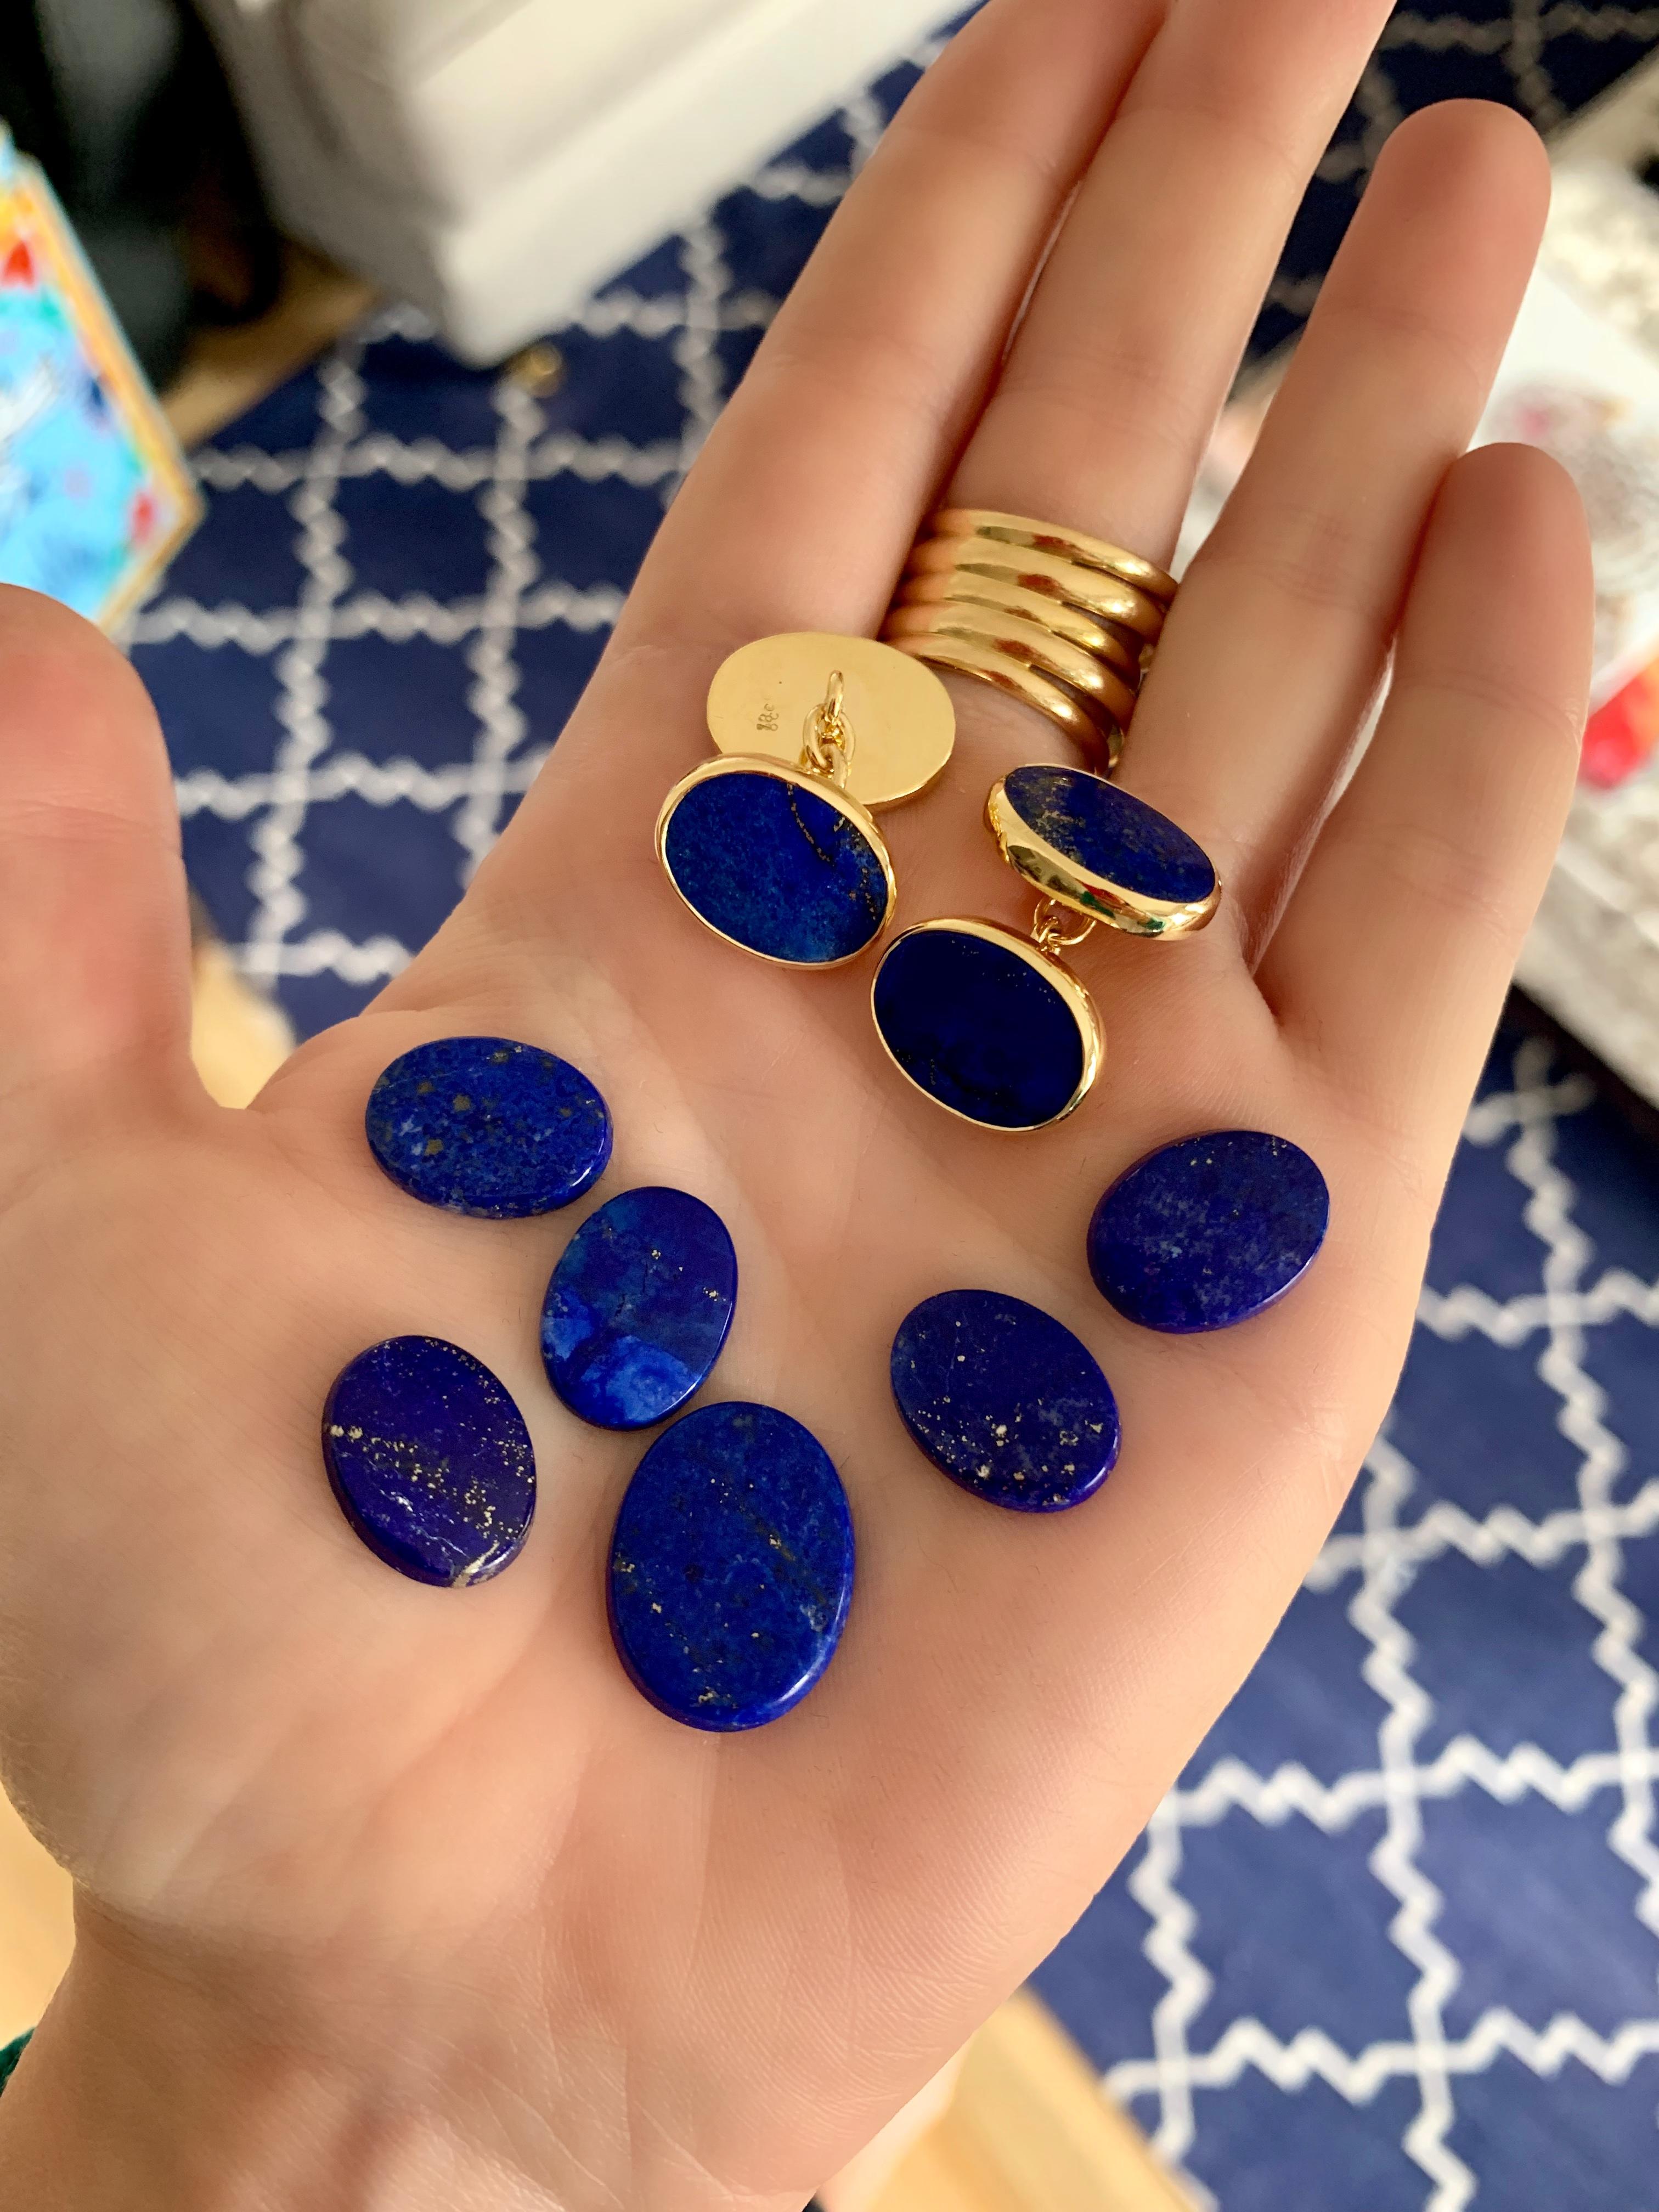 A pair of striking Lapis Lazuli cufflinks set in 18 karat yellow gold with gold chain links. Natural Lapis with natural inclusions creating a classic pair of very wearable cufflinks. Perfect for weddings, Christmas, Fathers Day and many other